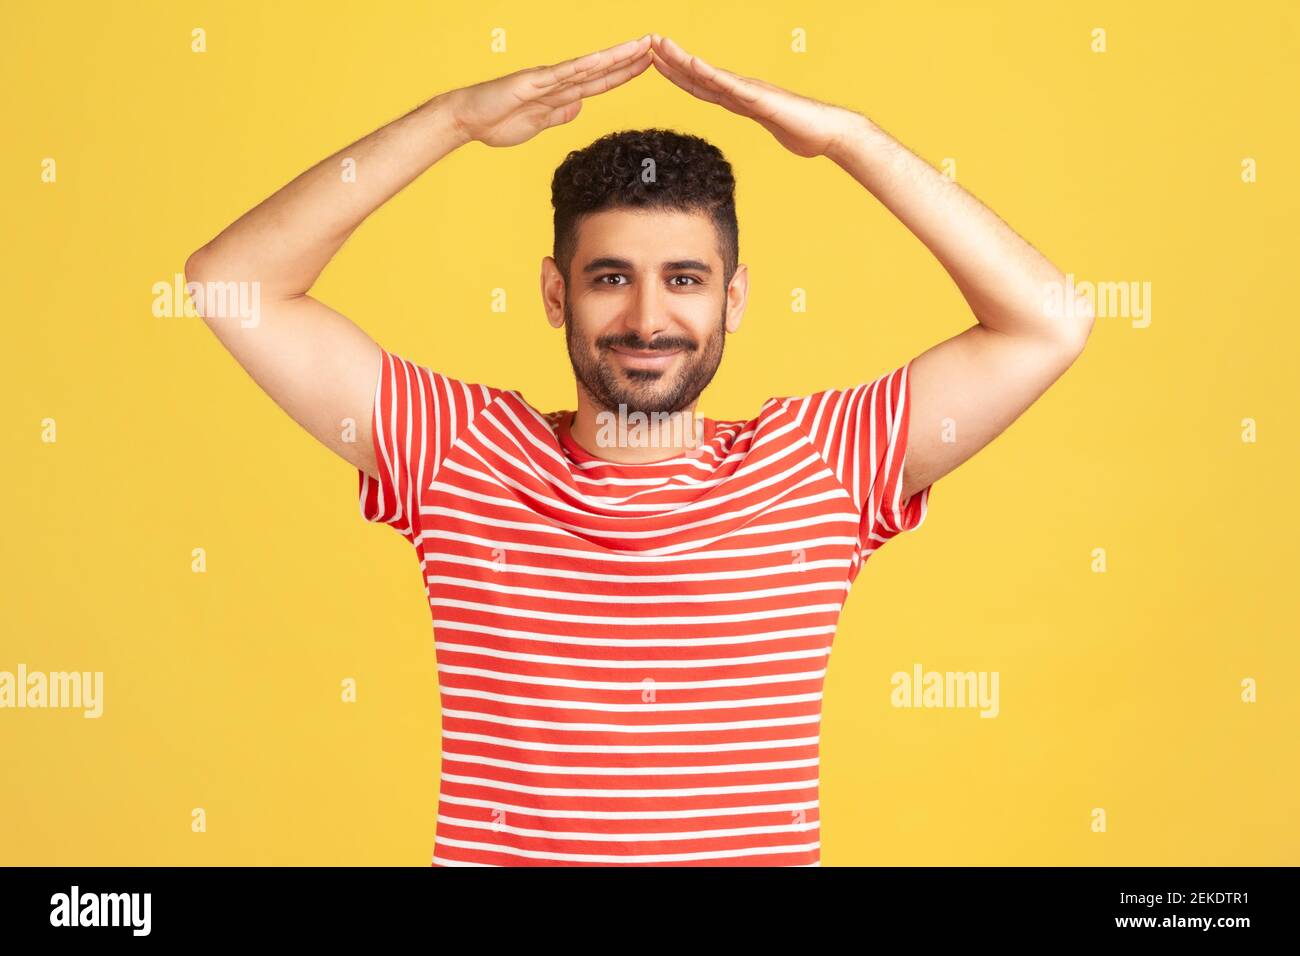 I'm in safety. Portrait of happy bearded man in striped t-shirt standing raising hands showing roof gesture and smiling contentedly, dreaming of house Stock Photo